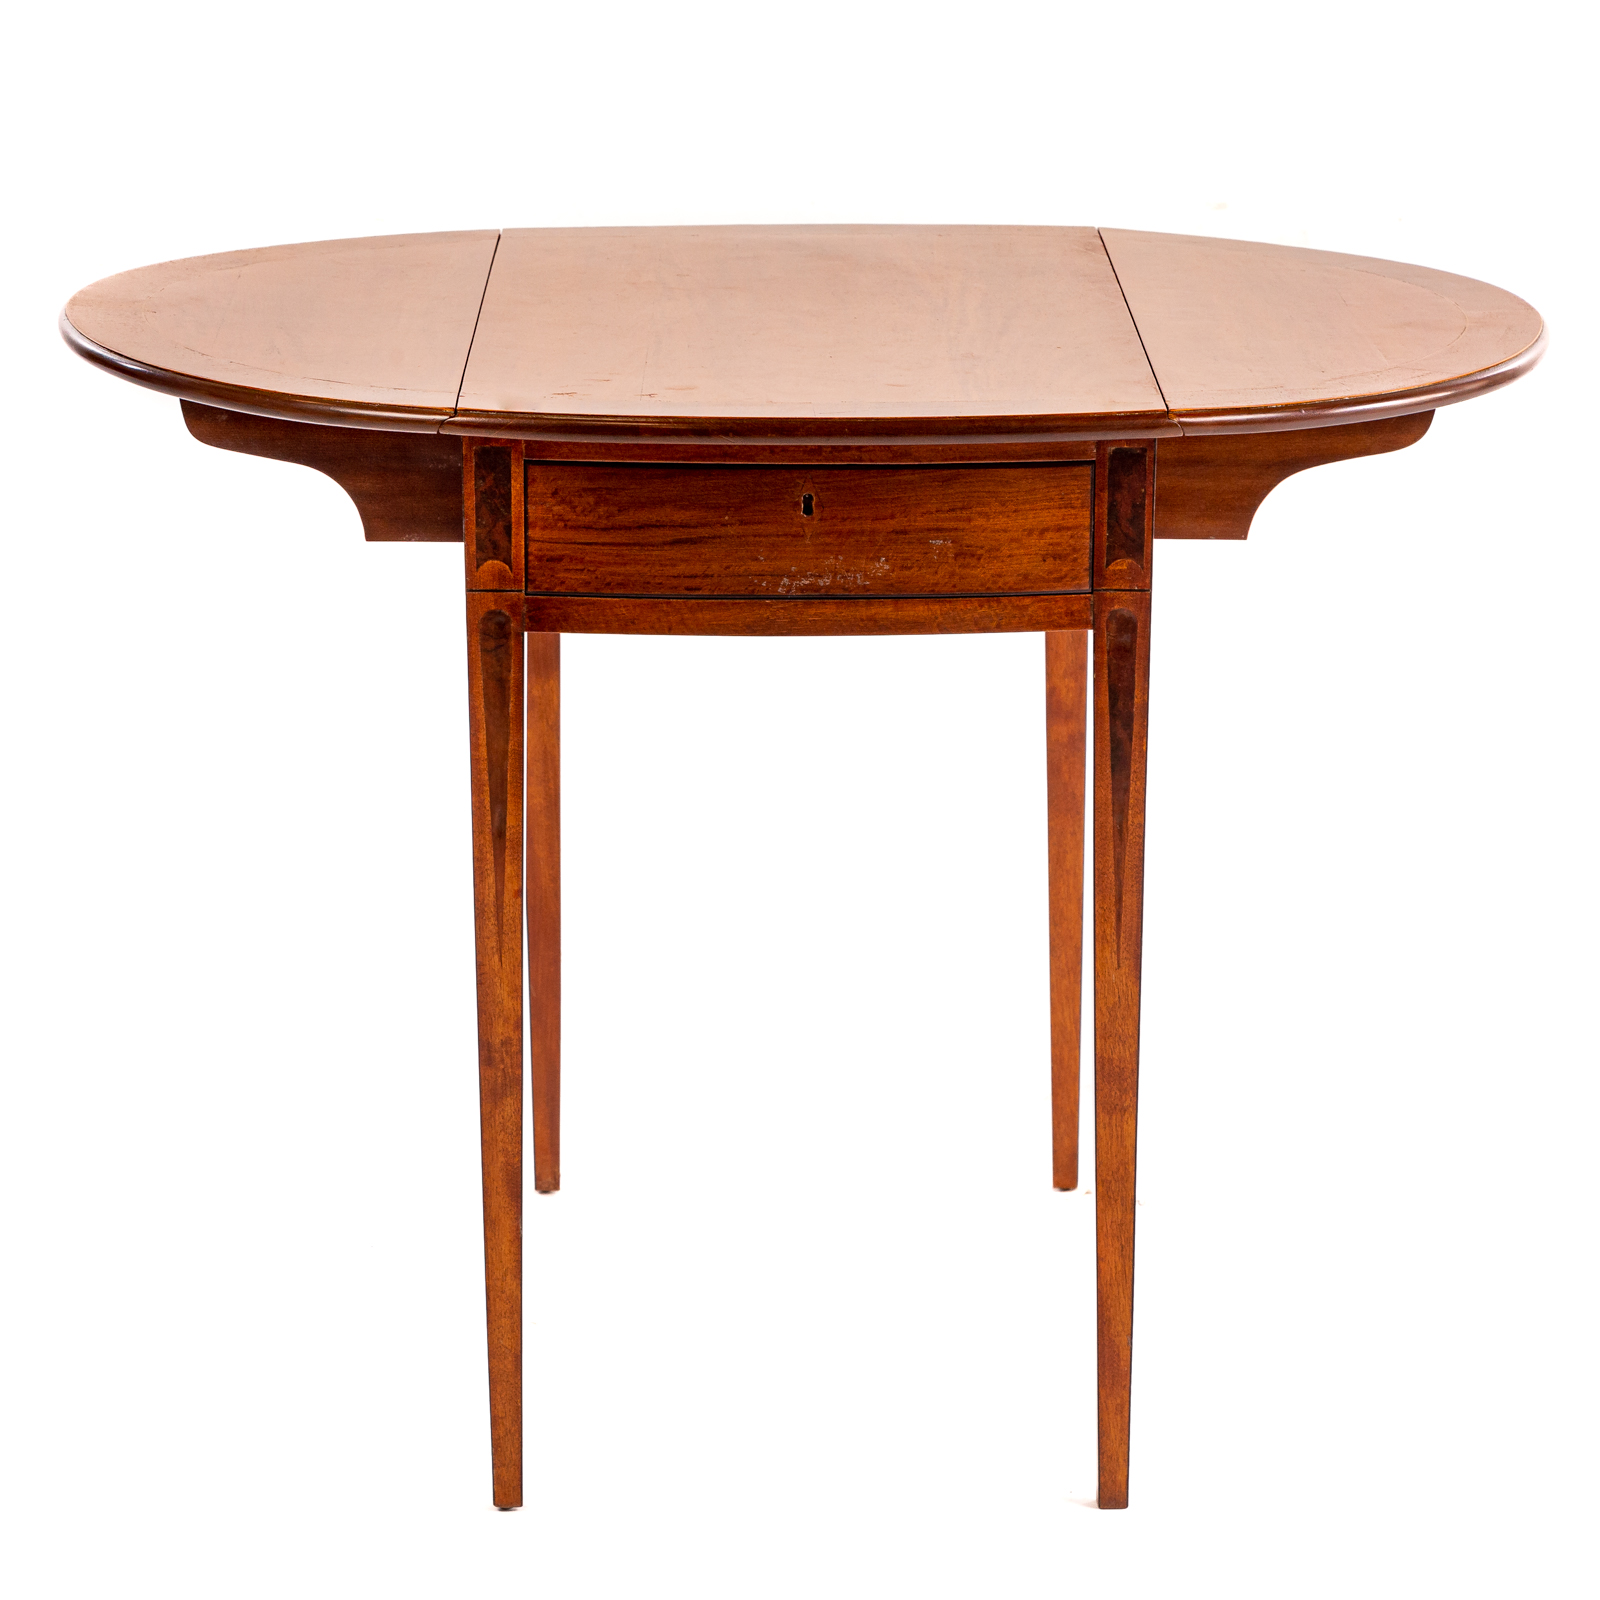 FEDERAL STYLE SATIN WOOD PEMBROKE TABLE